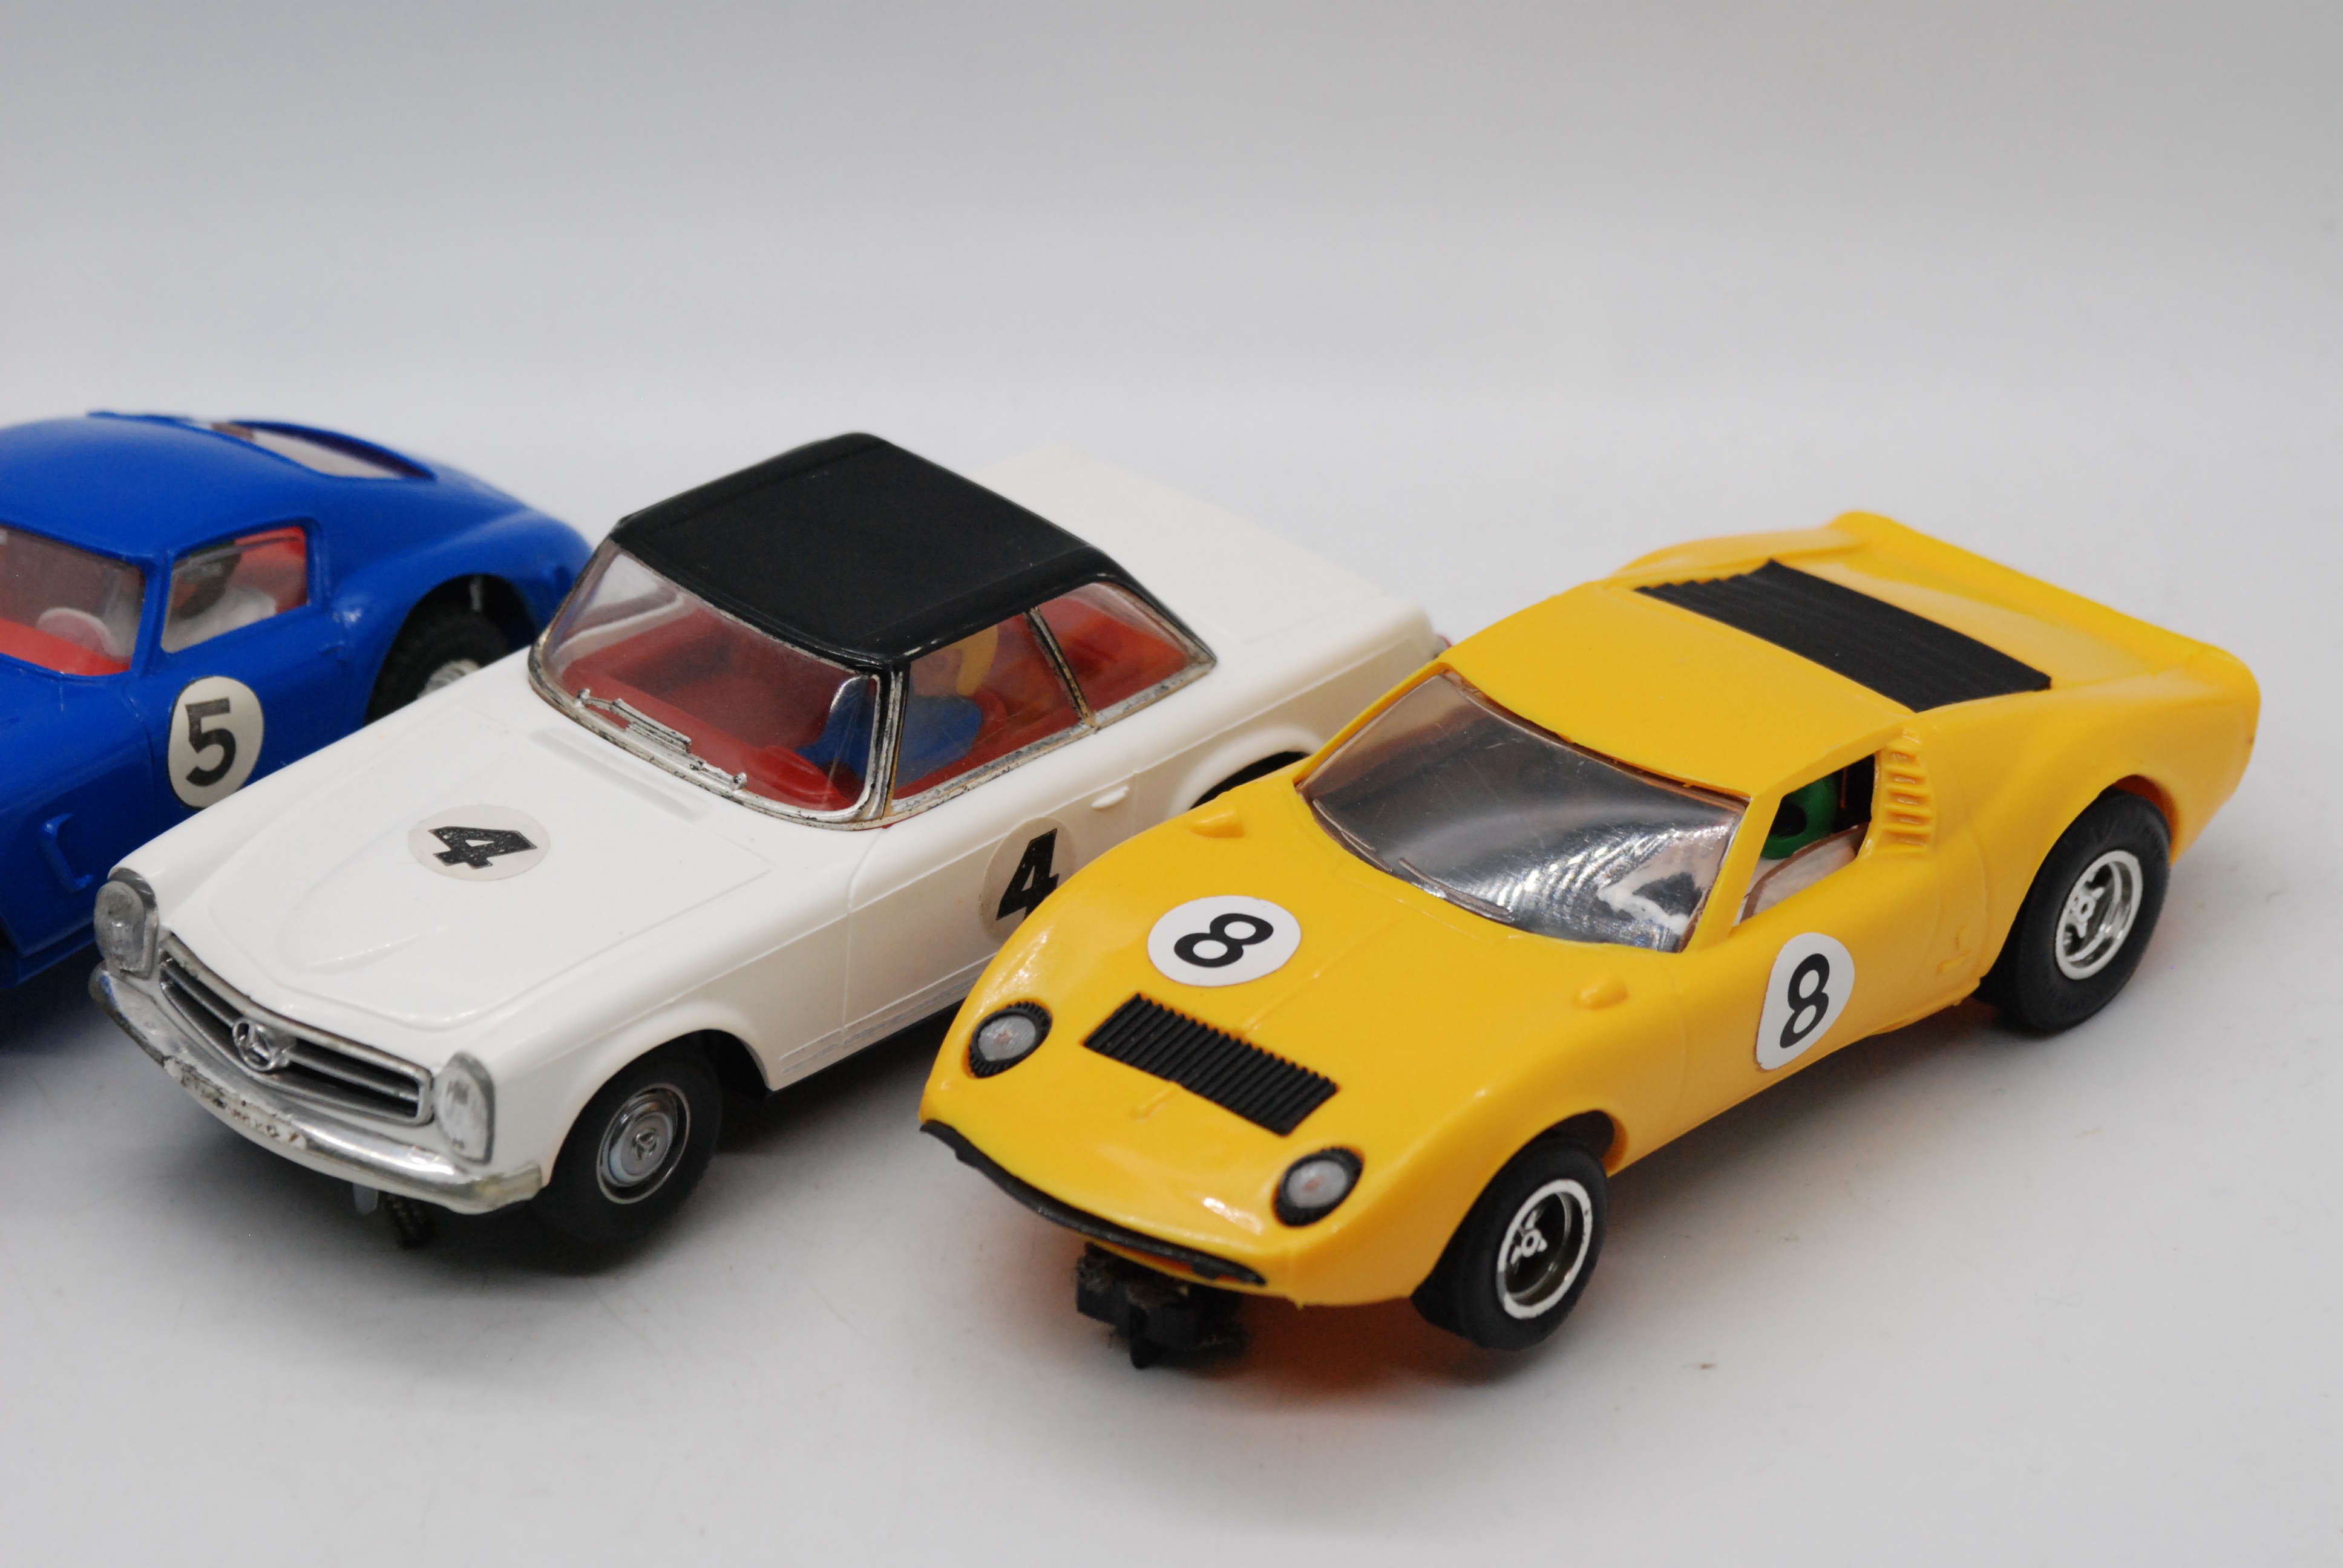 Scalextric - Three unboxed vintage Scalextric slot cars. - Image 3 of 7